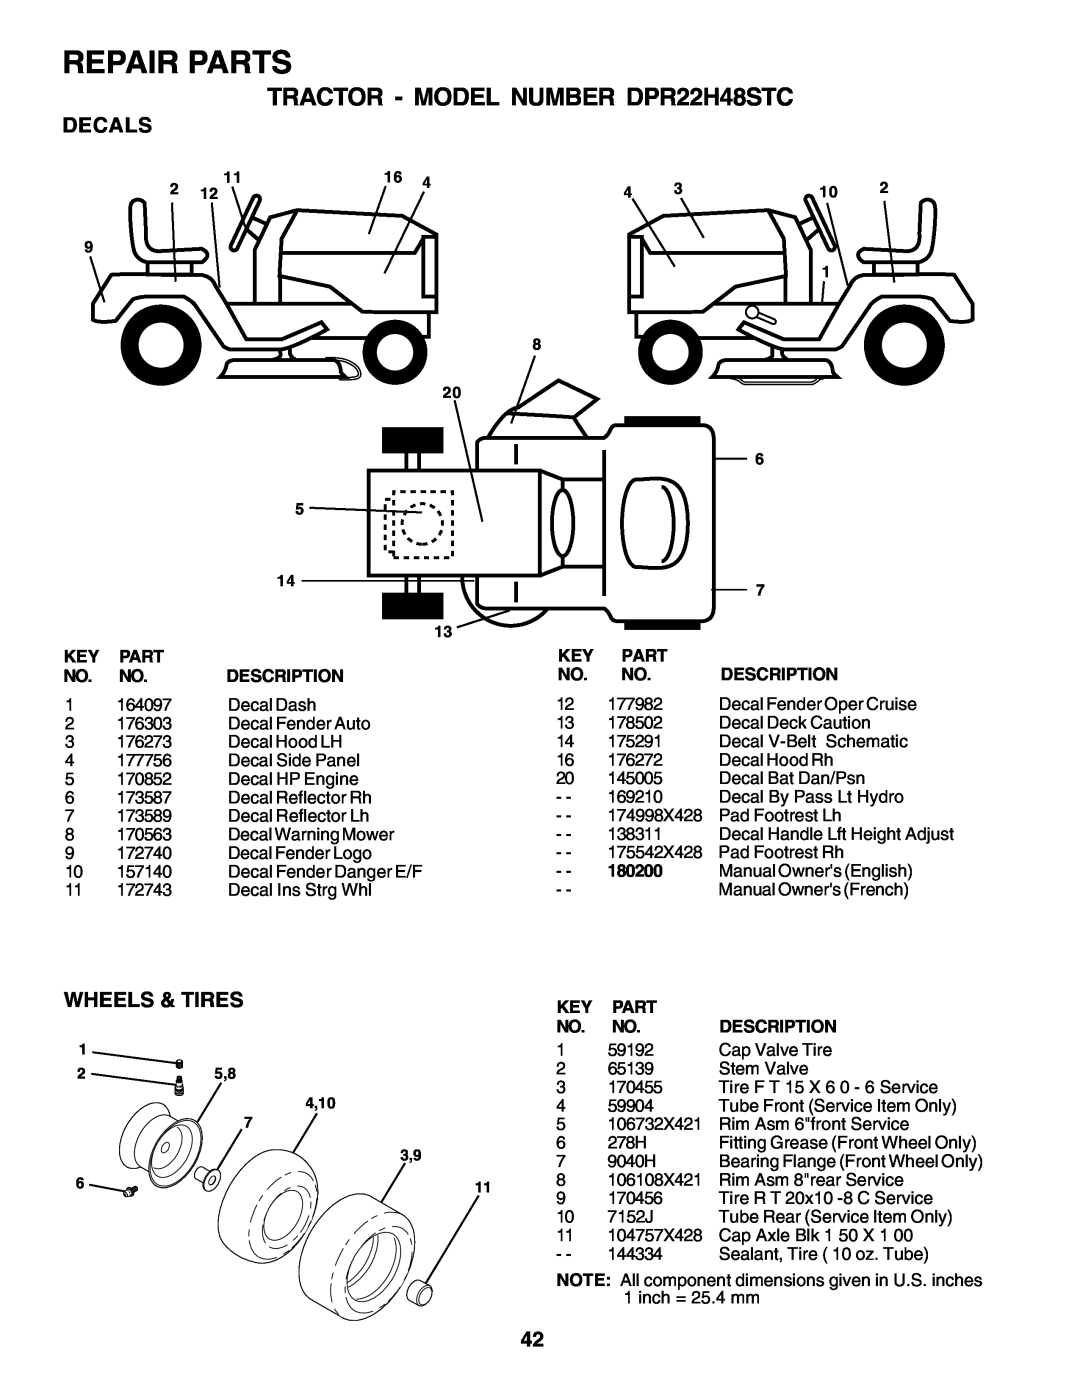 Poulan 180200 owner manual Repair Parts, TRACTOR - MODEL NUMBER DPR22H48STC, Decals, Wheels & Tires, 25,8 4,10 